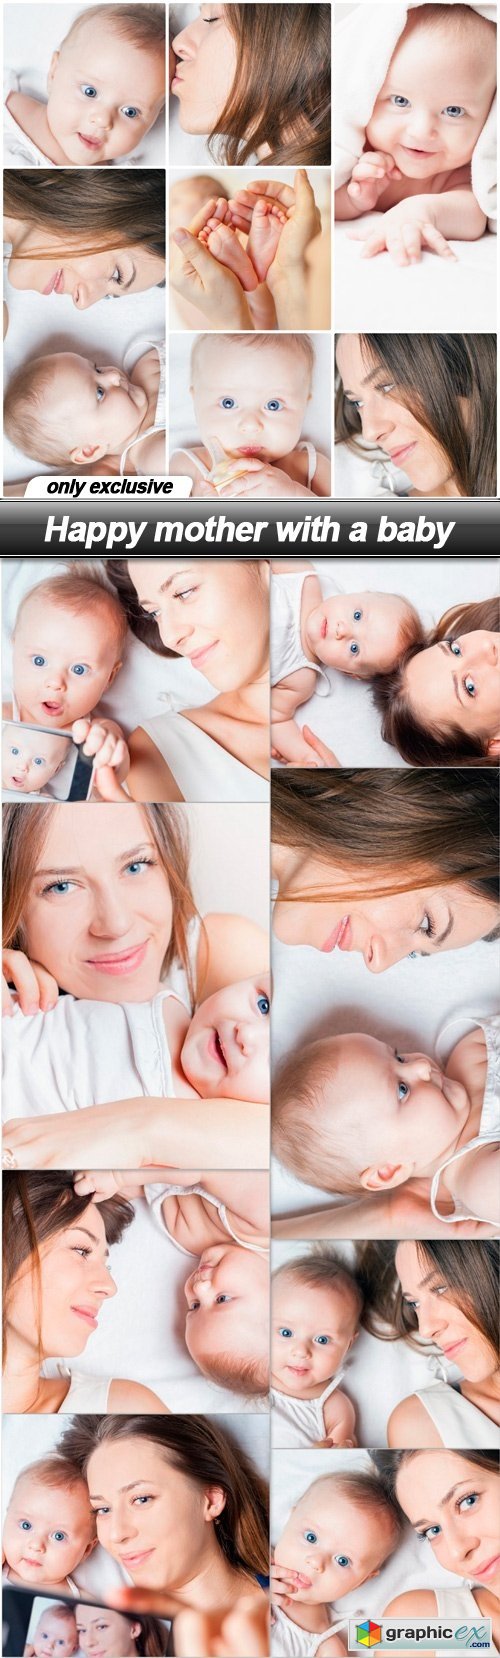 Happy mother with a baby - 9 UHQ JPEG